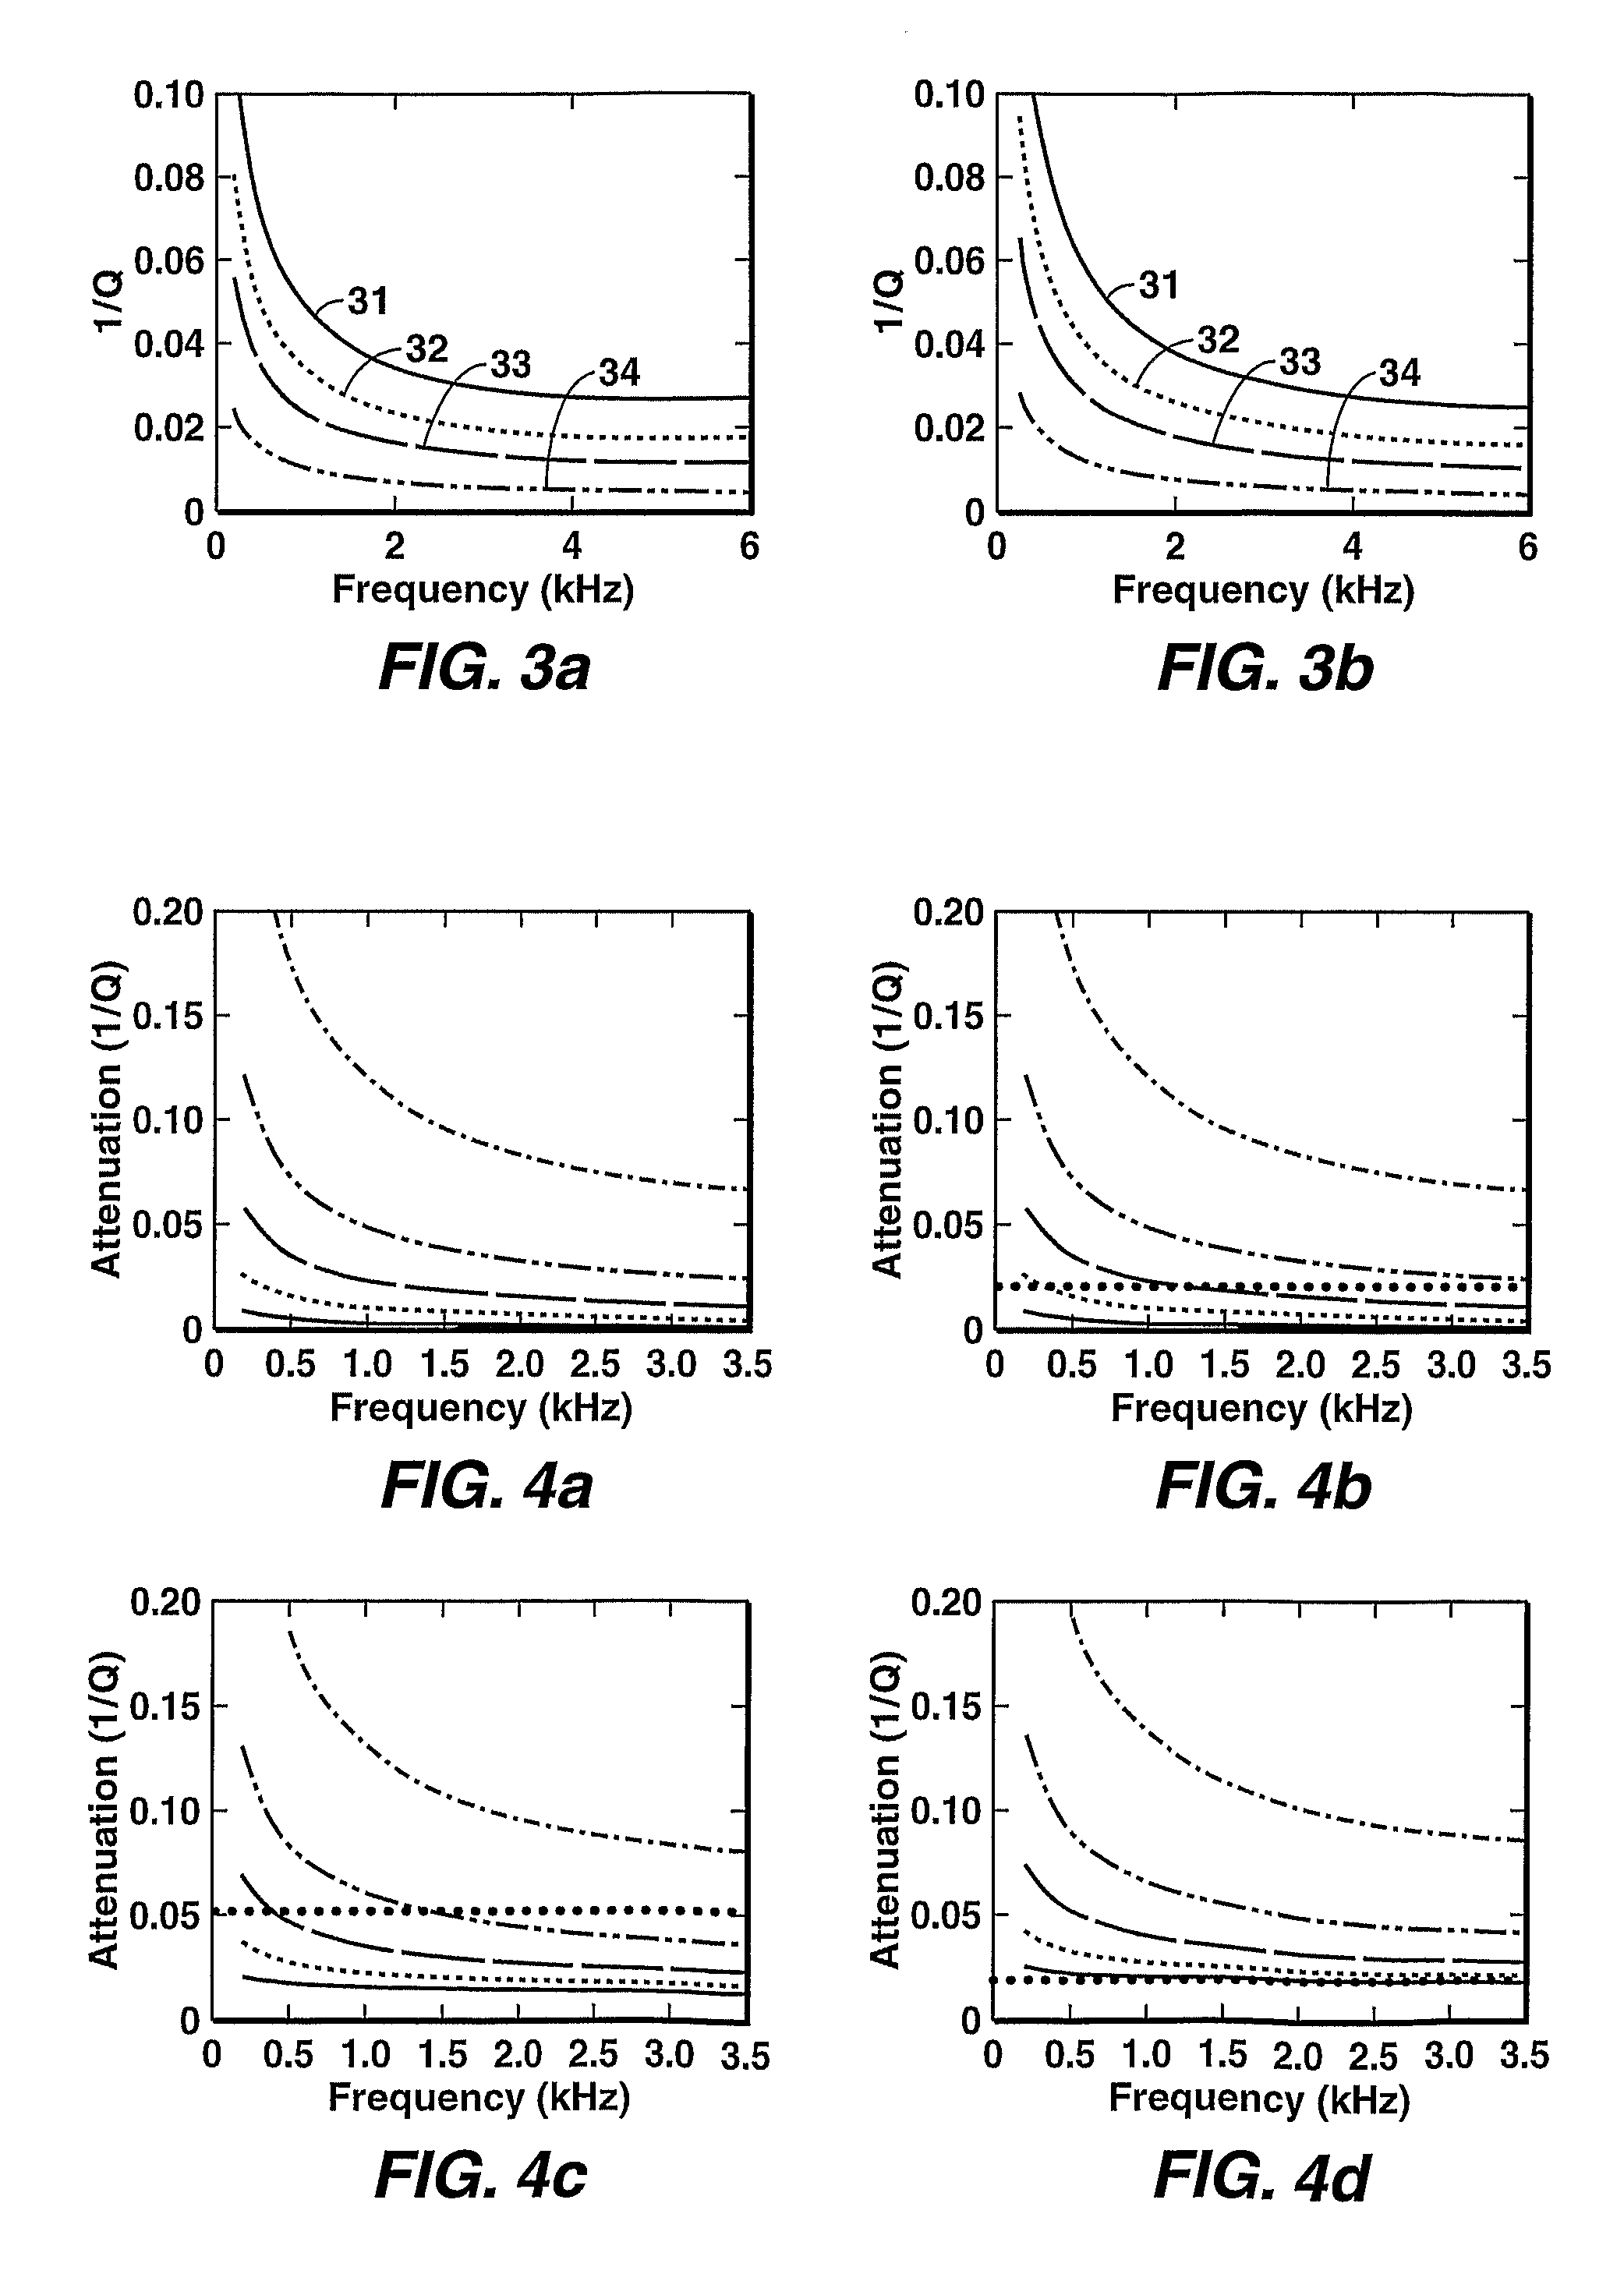 Method for determining reservoir permeability form borehole stoneley-wave attenuation using biot's poroelastic theory